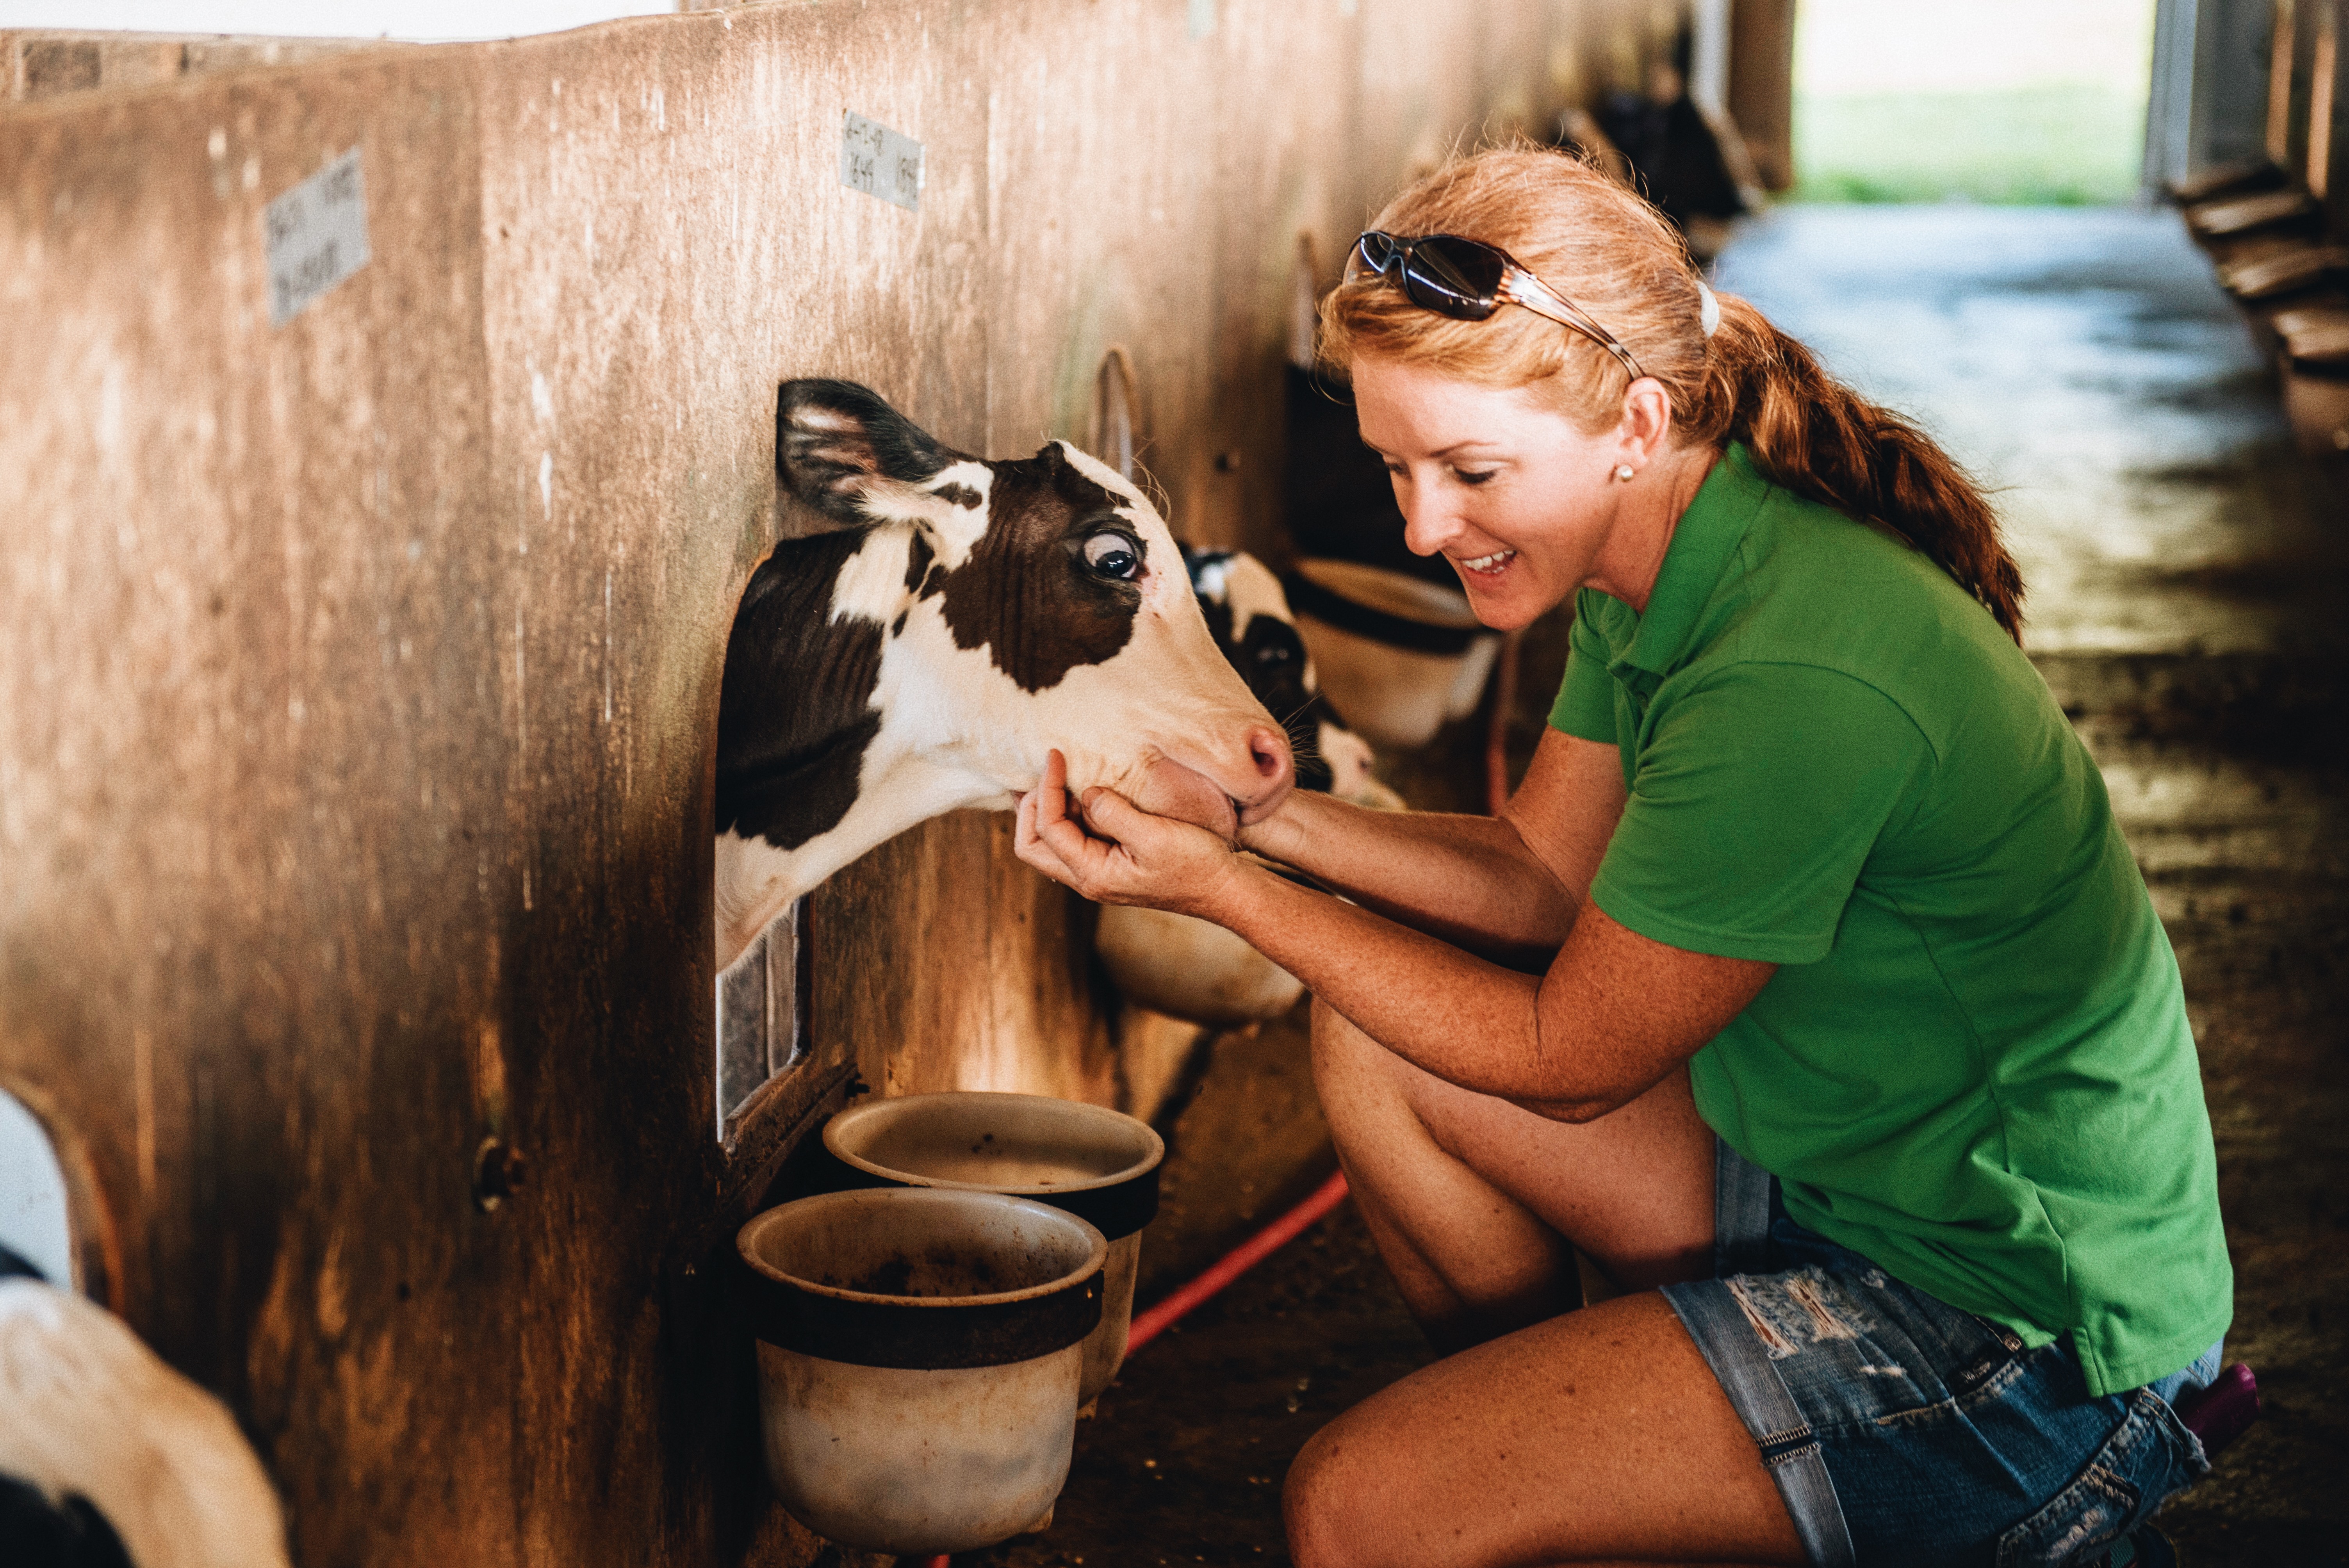 Agritourism is a valuable tool used to educate the public about farming. Tour guide Jamie Pearson gives a thorough behind-the-scenes tour of dairy farming with a schooling on milk. 
